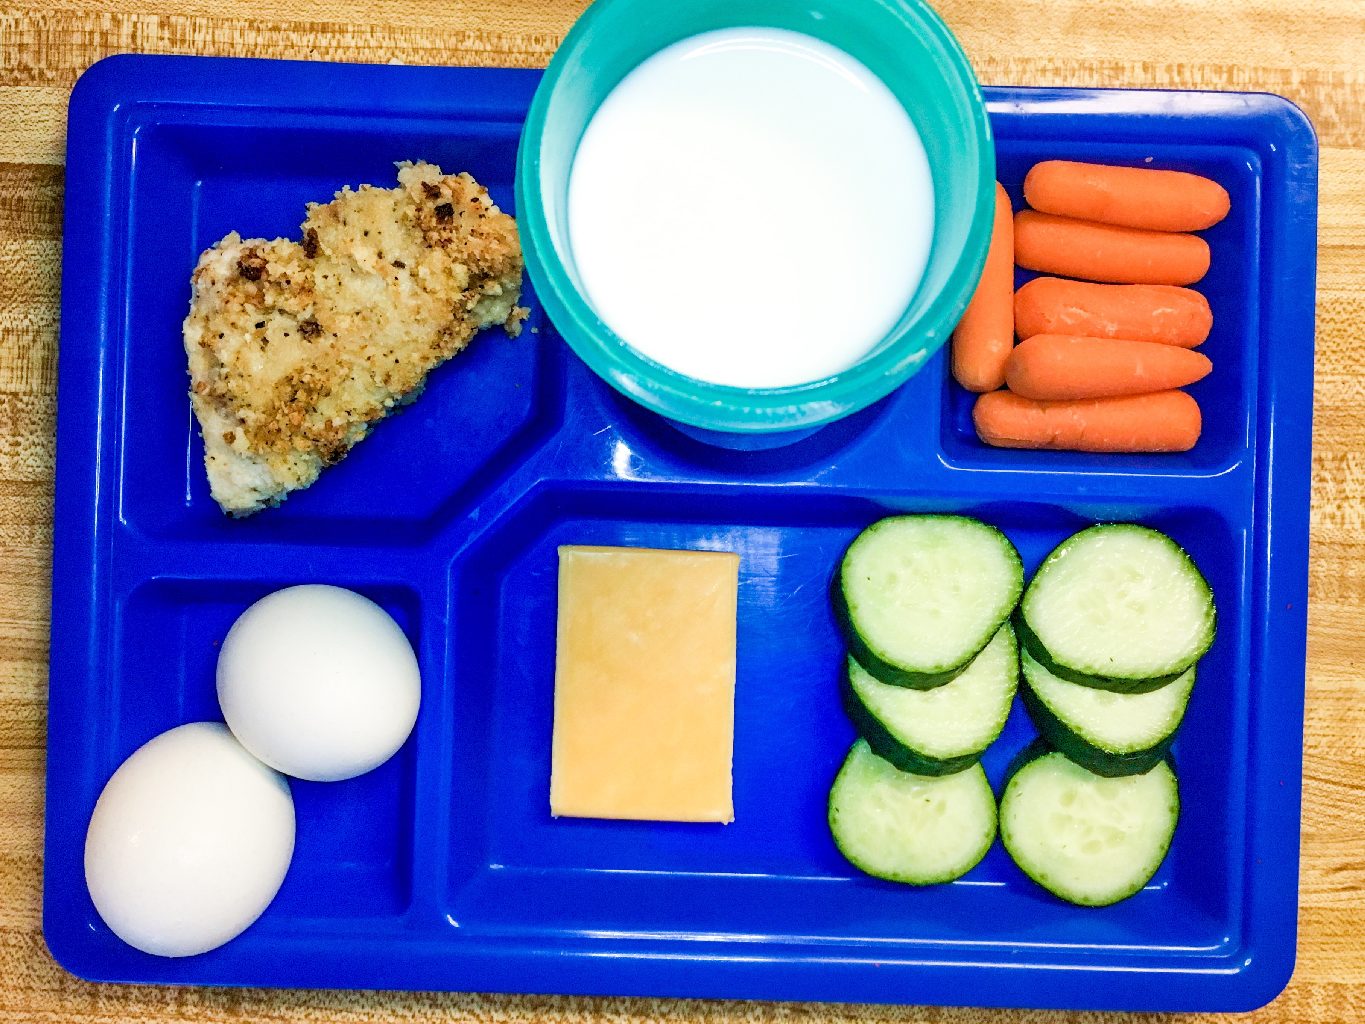 Better School Lunch Ideas for the Entire Year